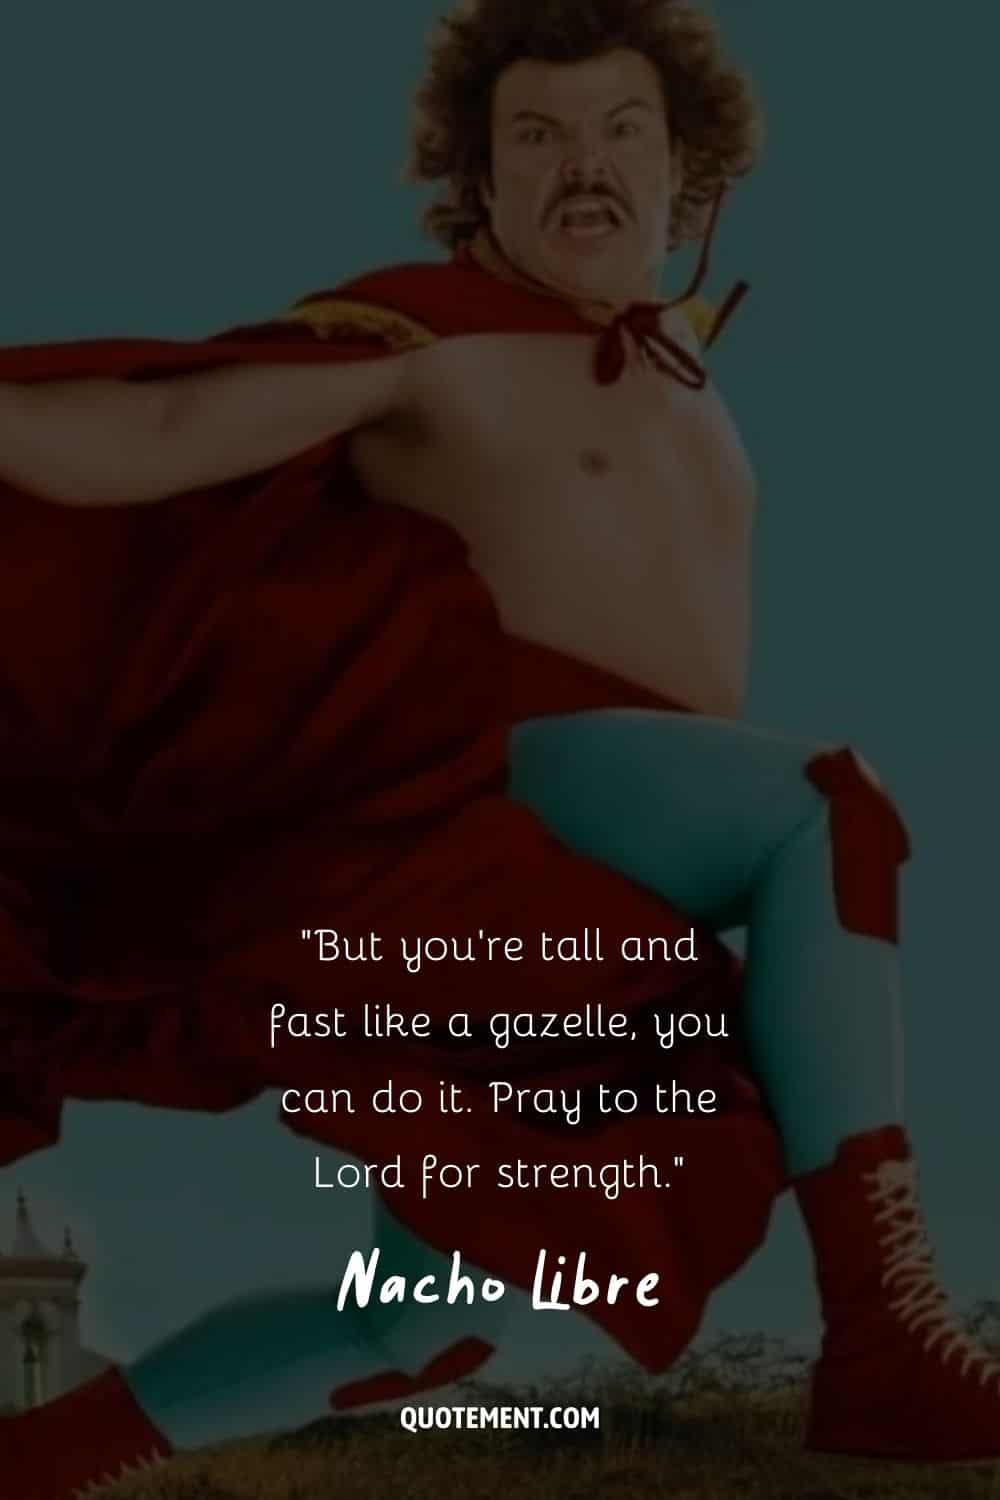 But you’re tall and fast like a gazelle, you can do it. Pray to the Lord for strength.